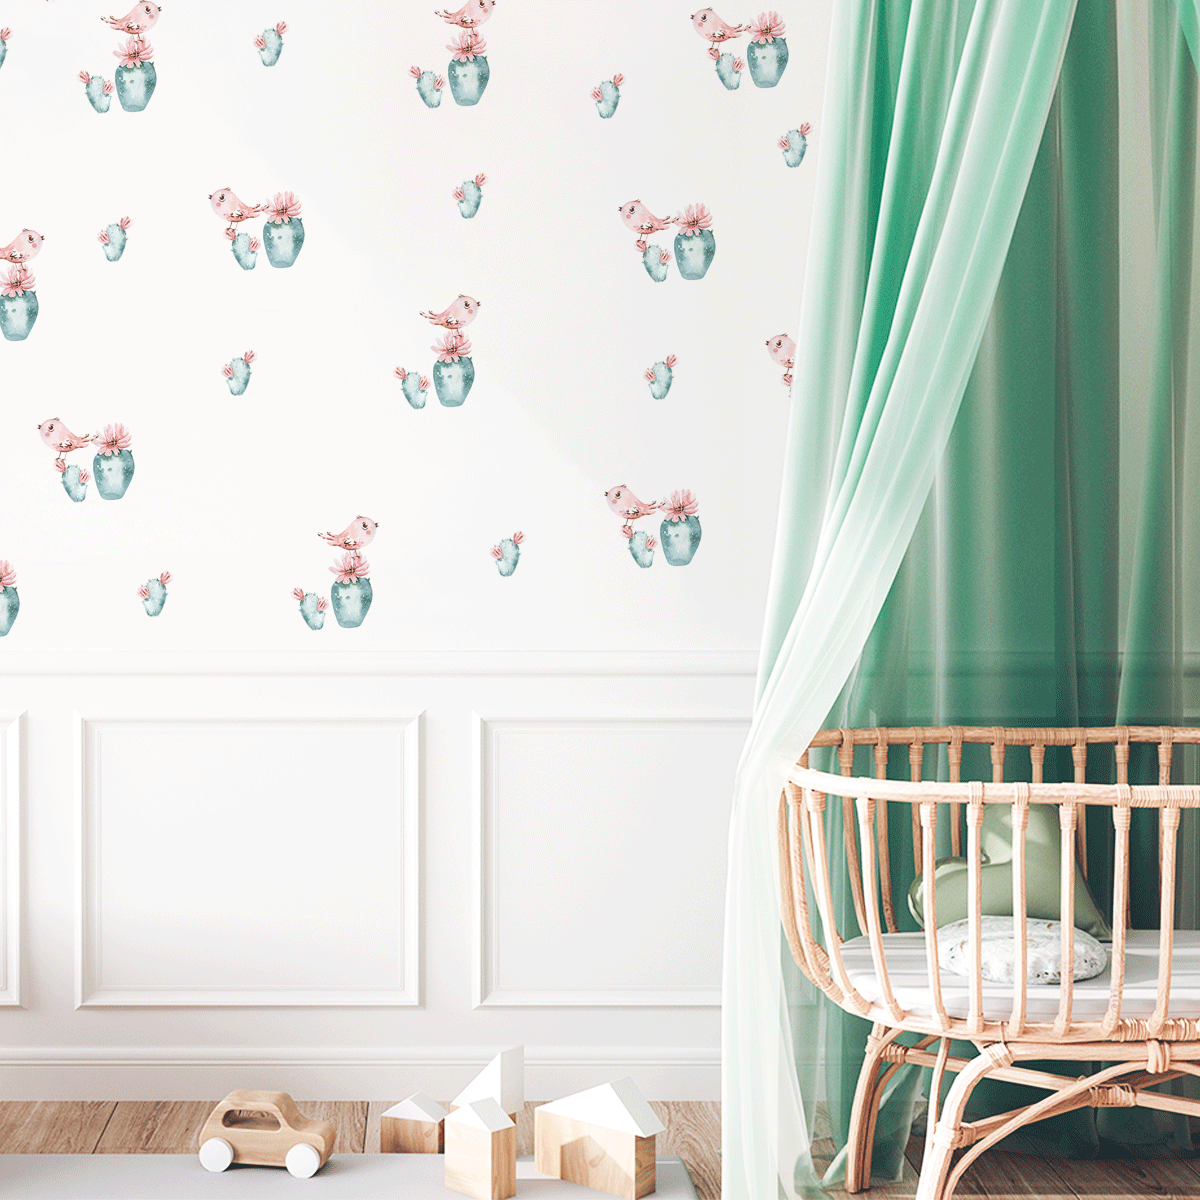 Bird wall stickers - Tropical enchantment